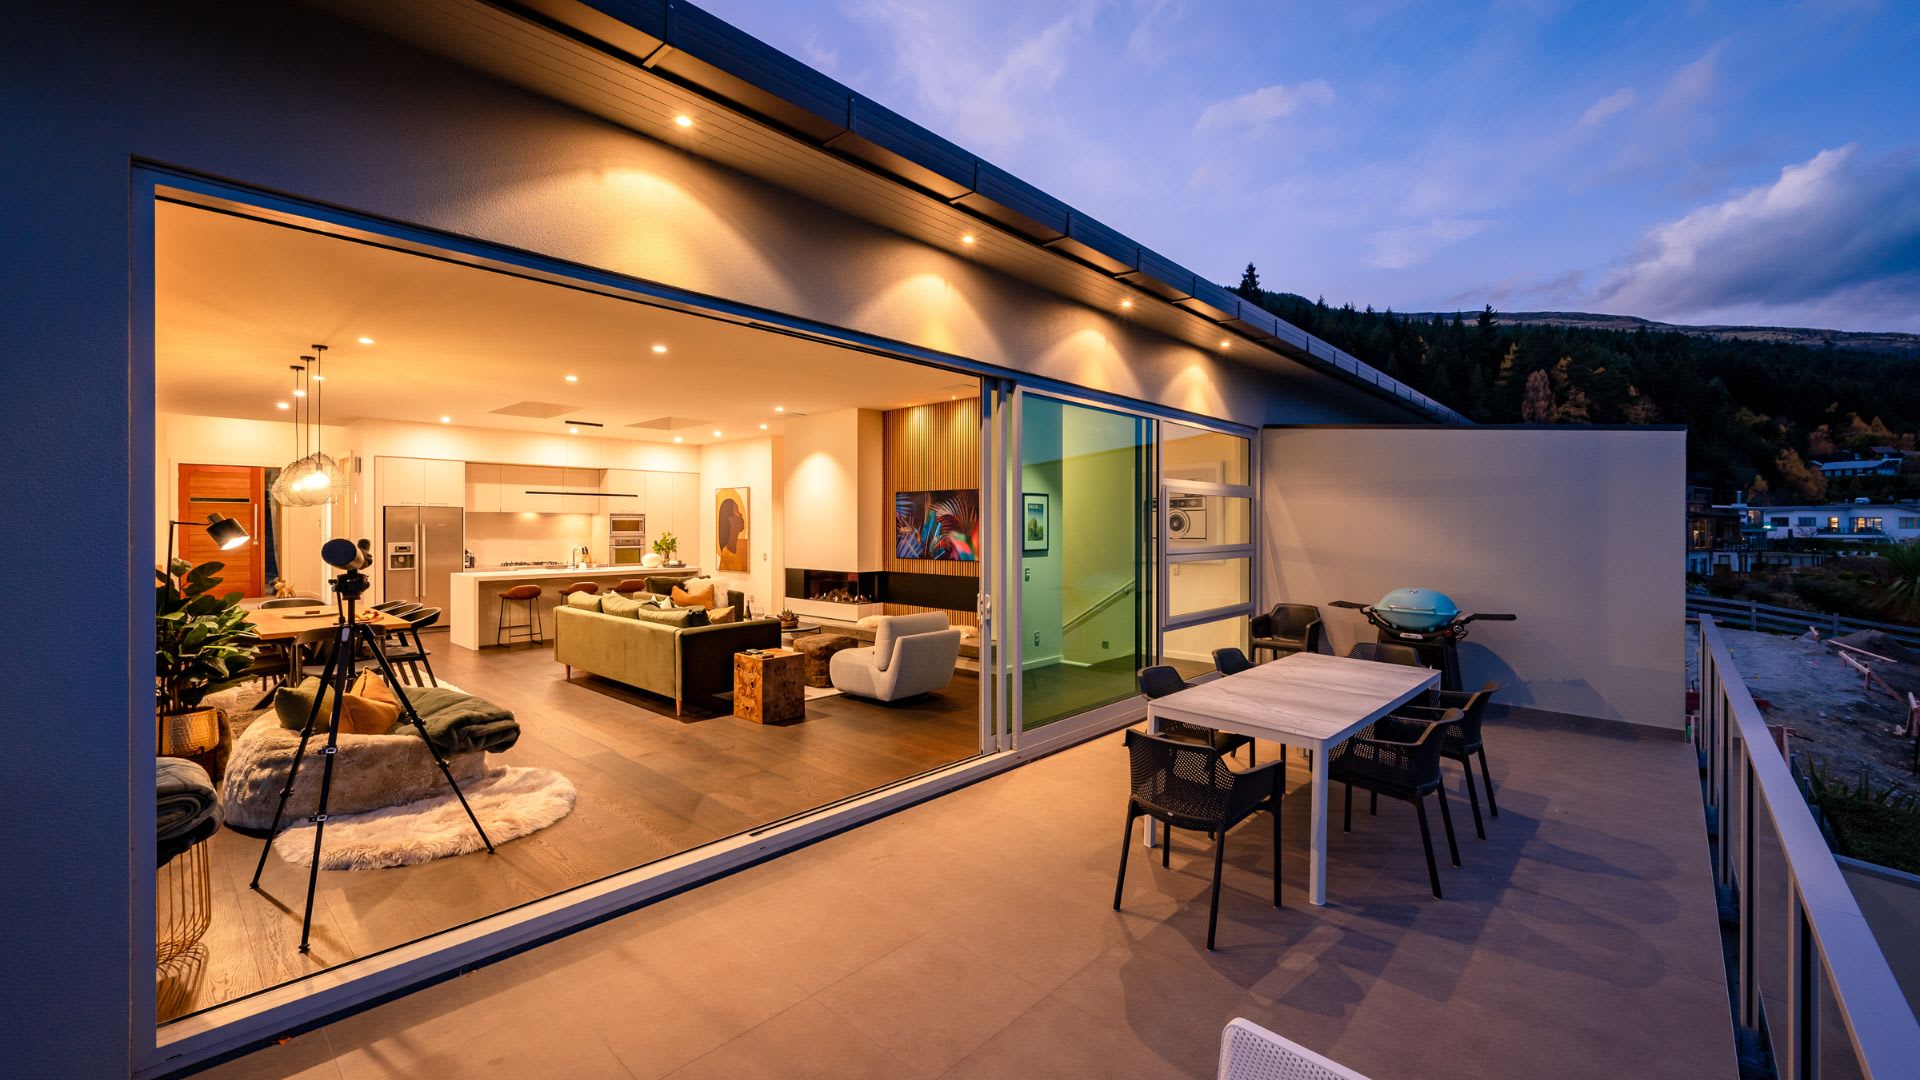 Step out onto the open-door balcony - NZ luxury travel